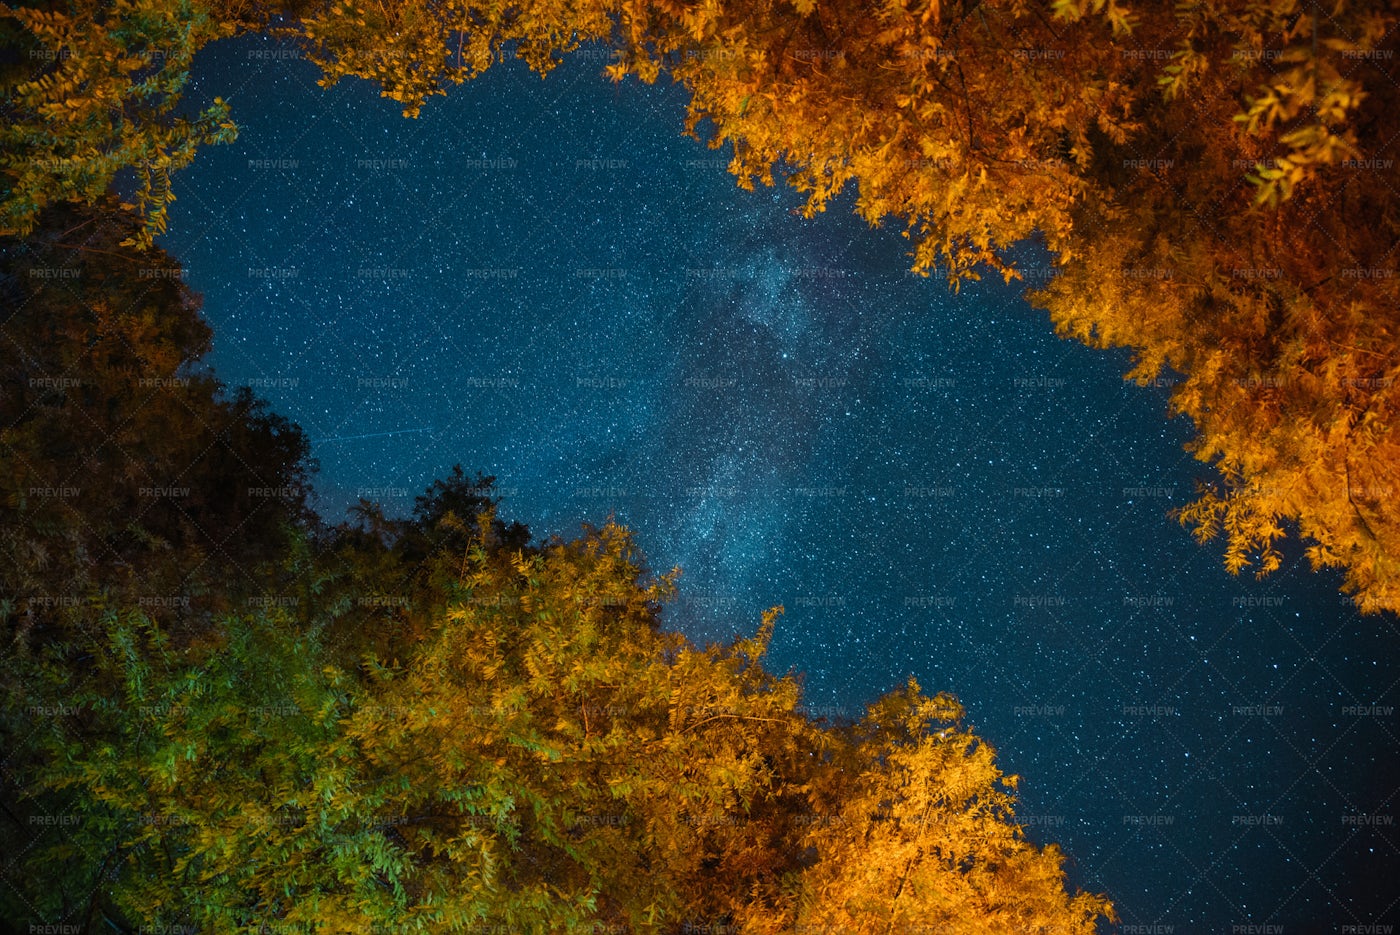 Starry Sky And Autumn Colors: Stock Photos